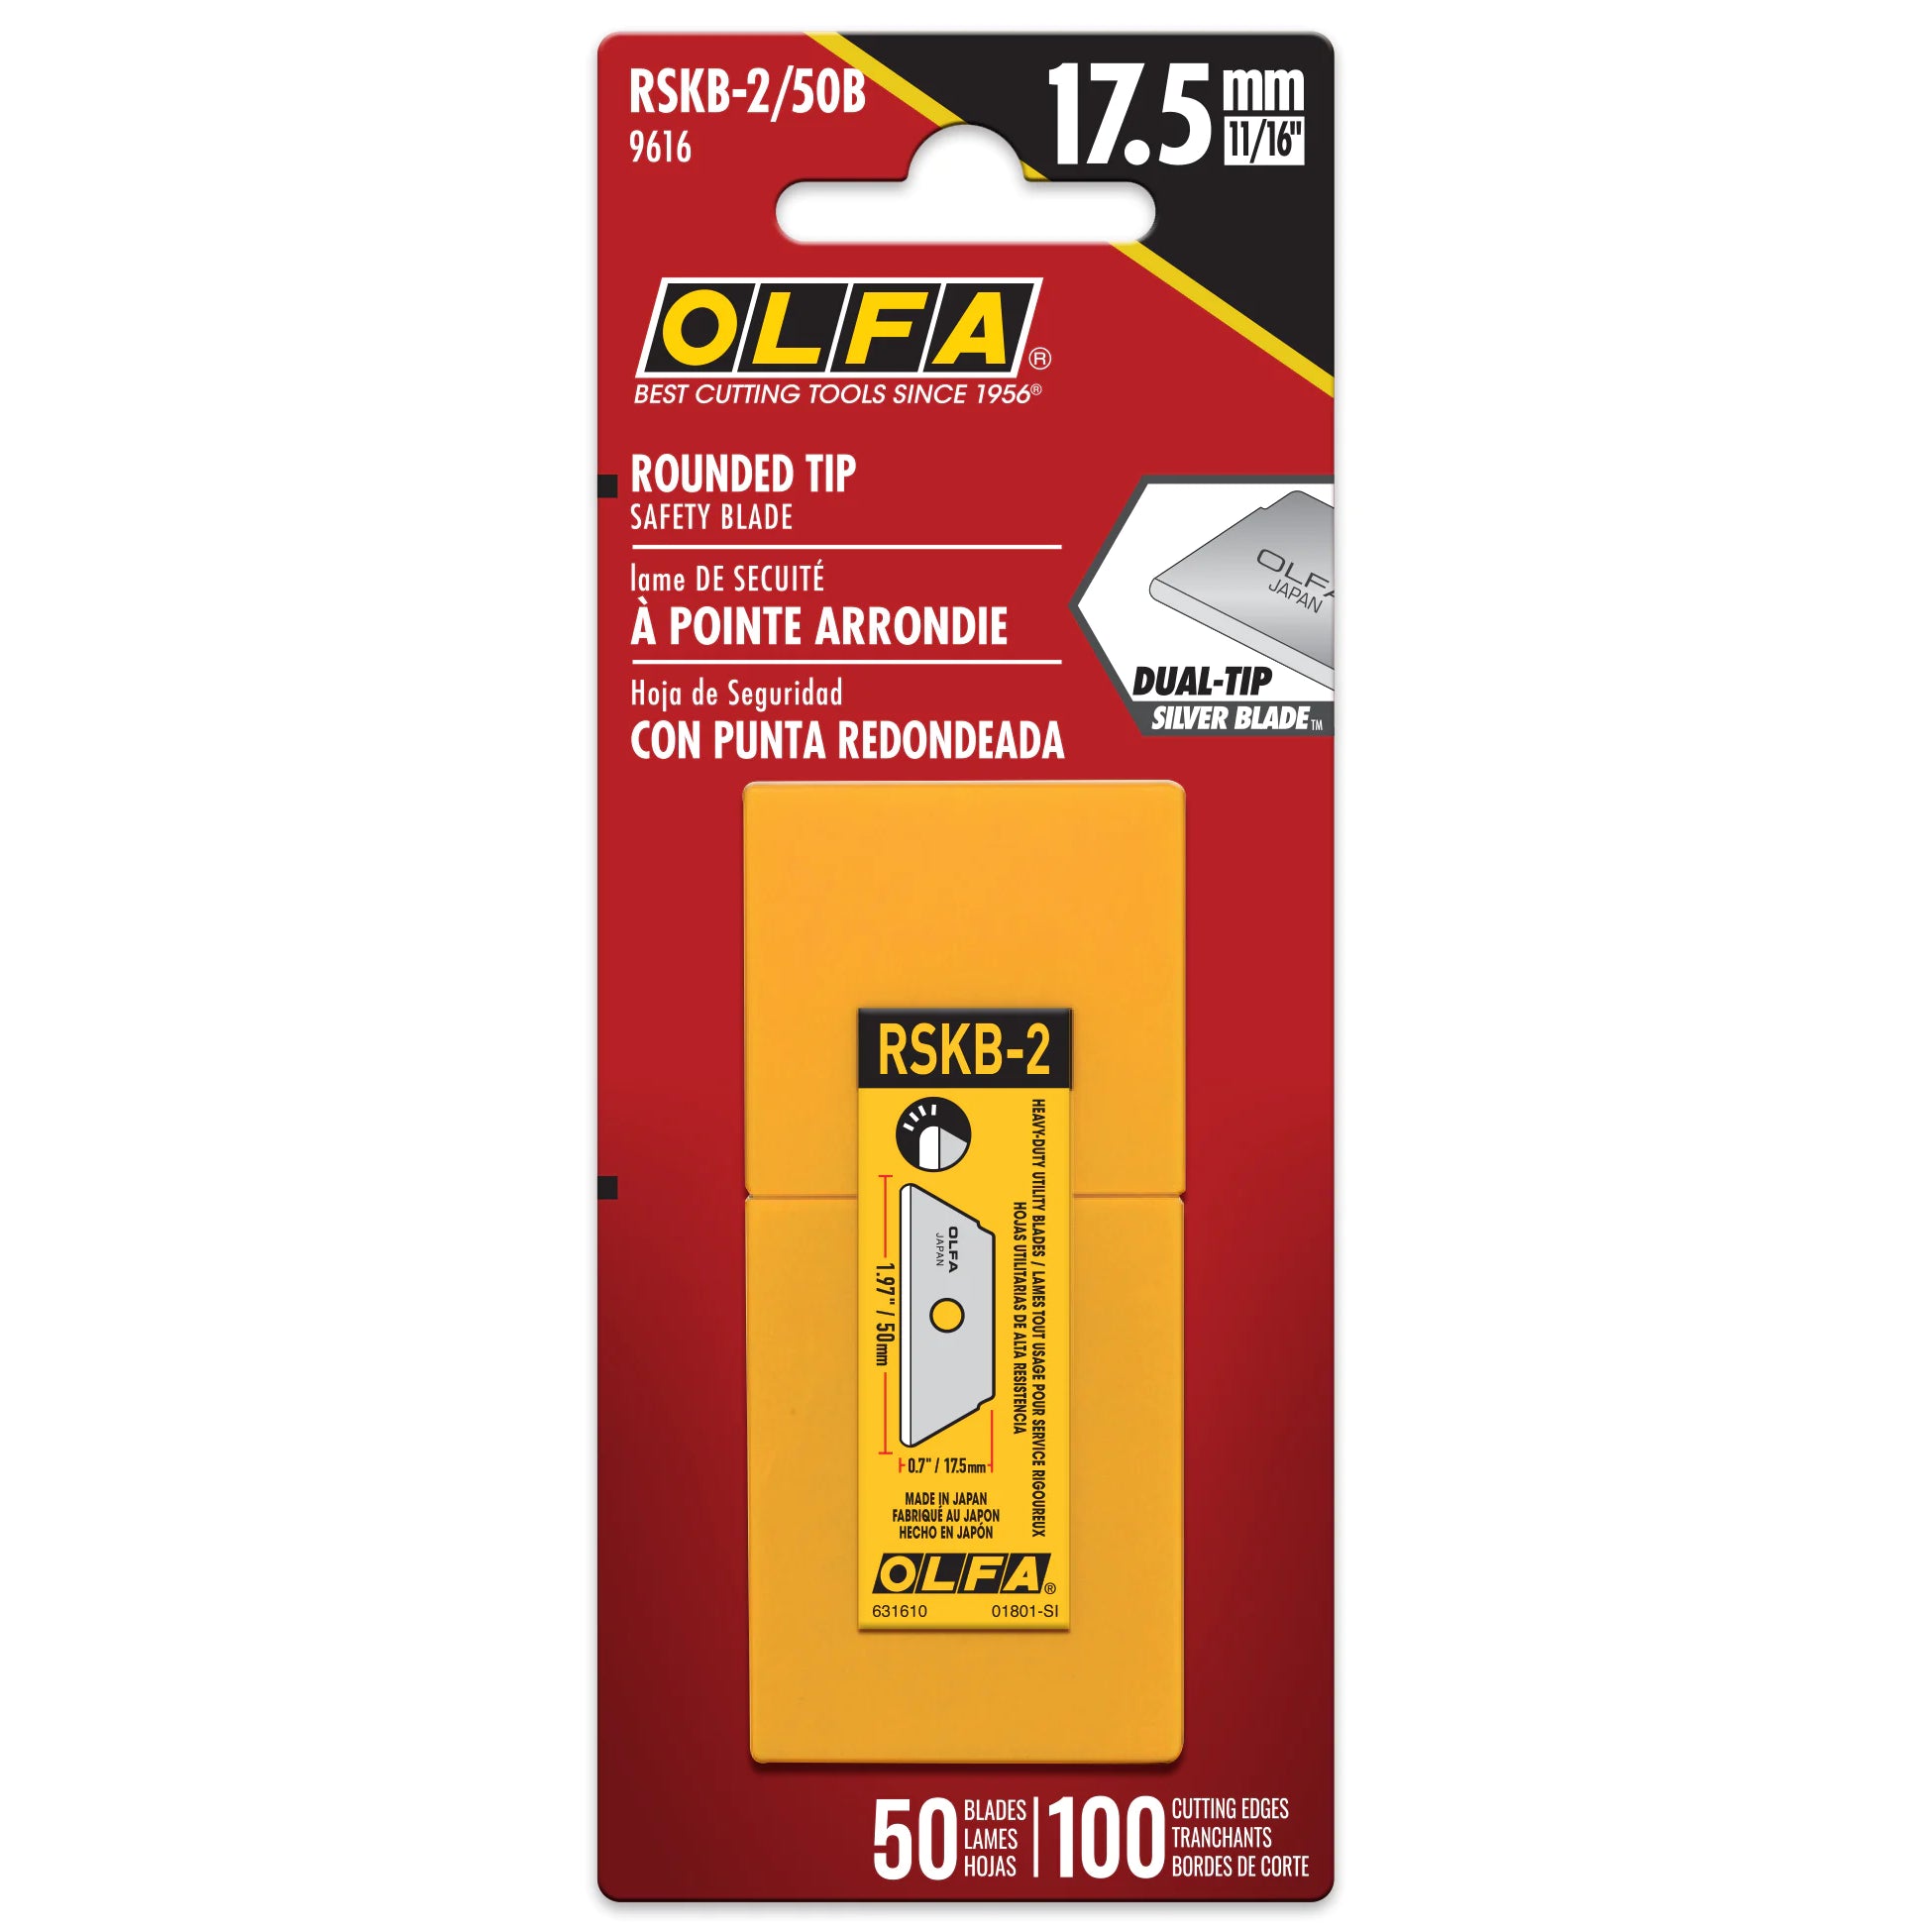 OLFA Round Tip Replacement Blades for SK-4, SK-6 & SK-9 Safety Knives  RSKB-2